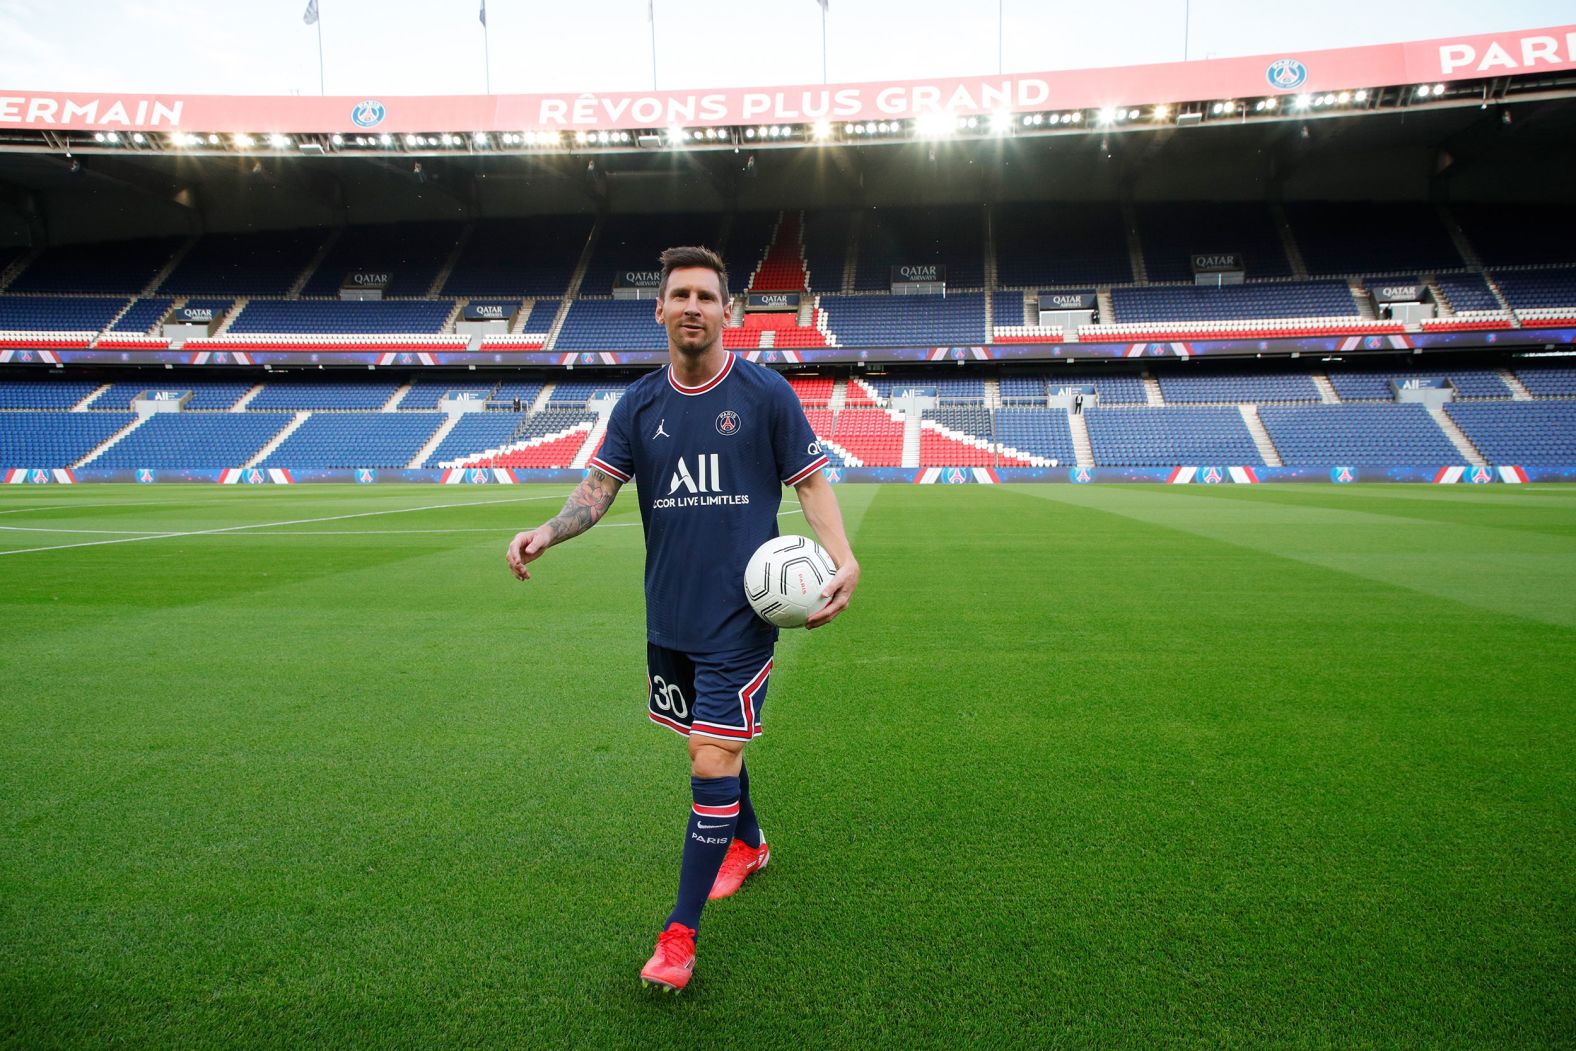 Messi is unveiled with his new club, Paris Saint-Germain, in August 2021.